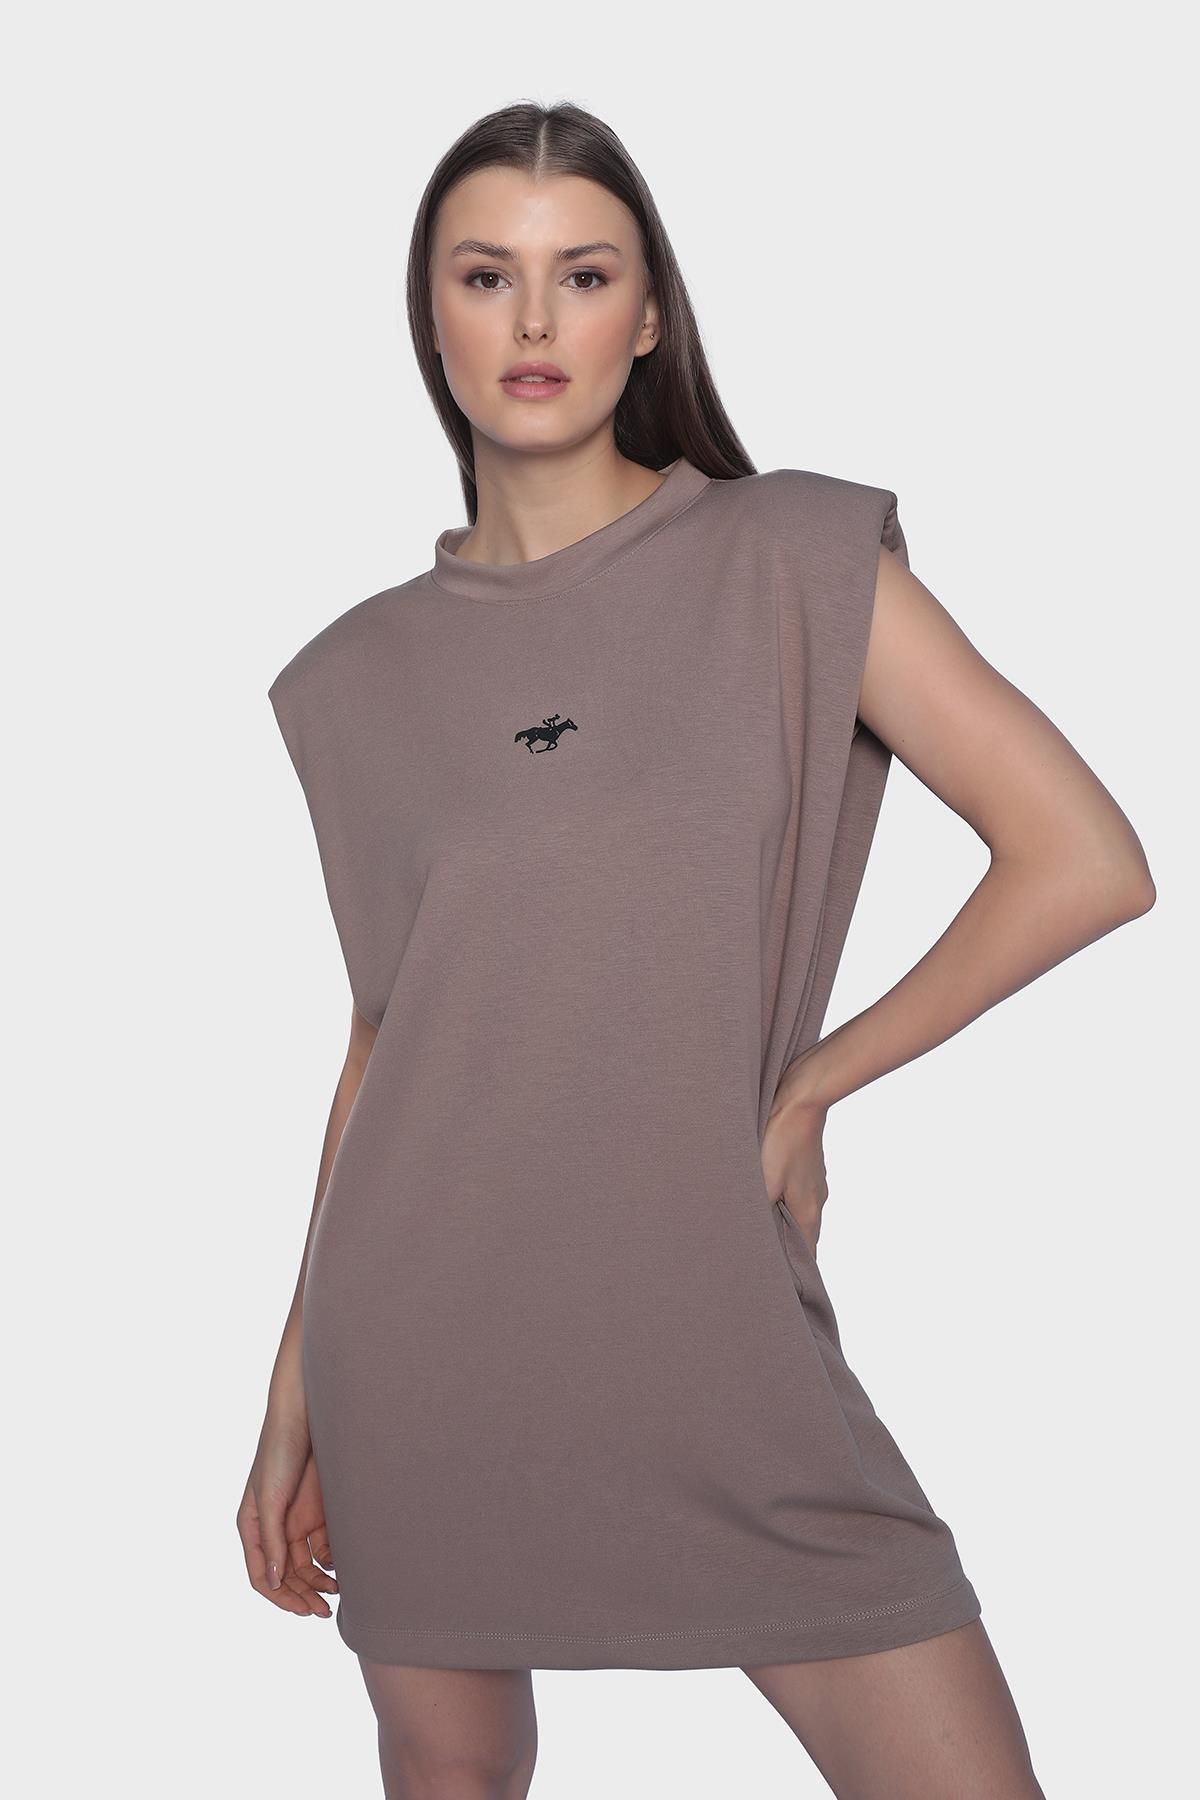 Sleeveless mini dress with oversized round neck and shoulder support - Mink